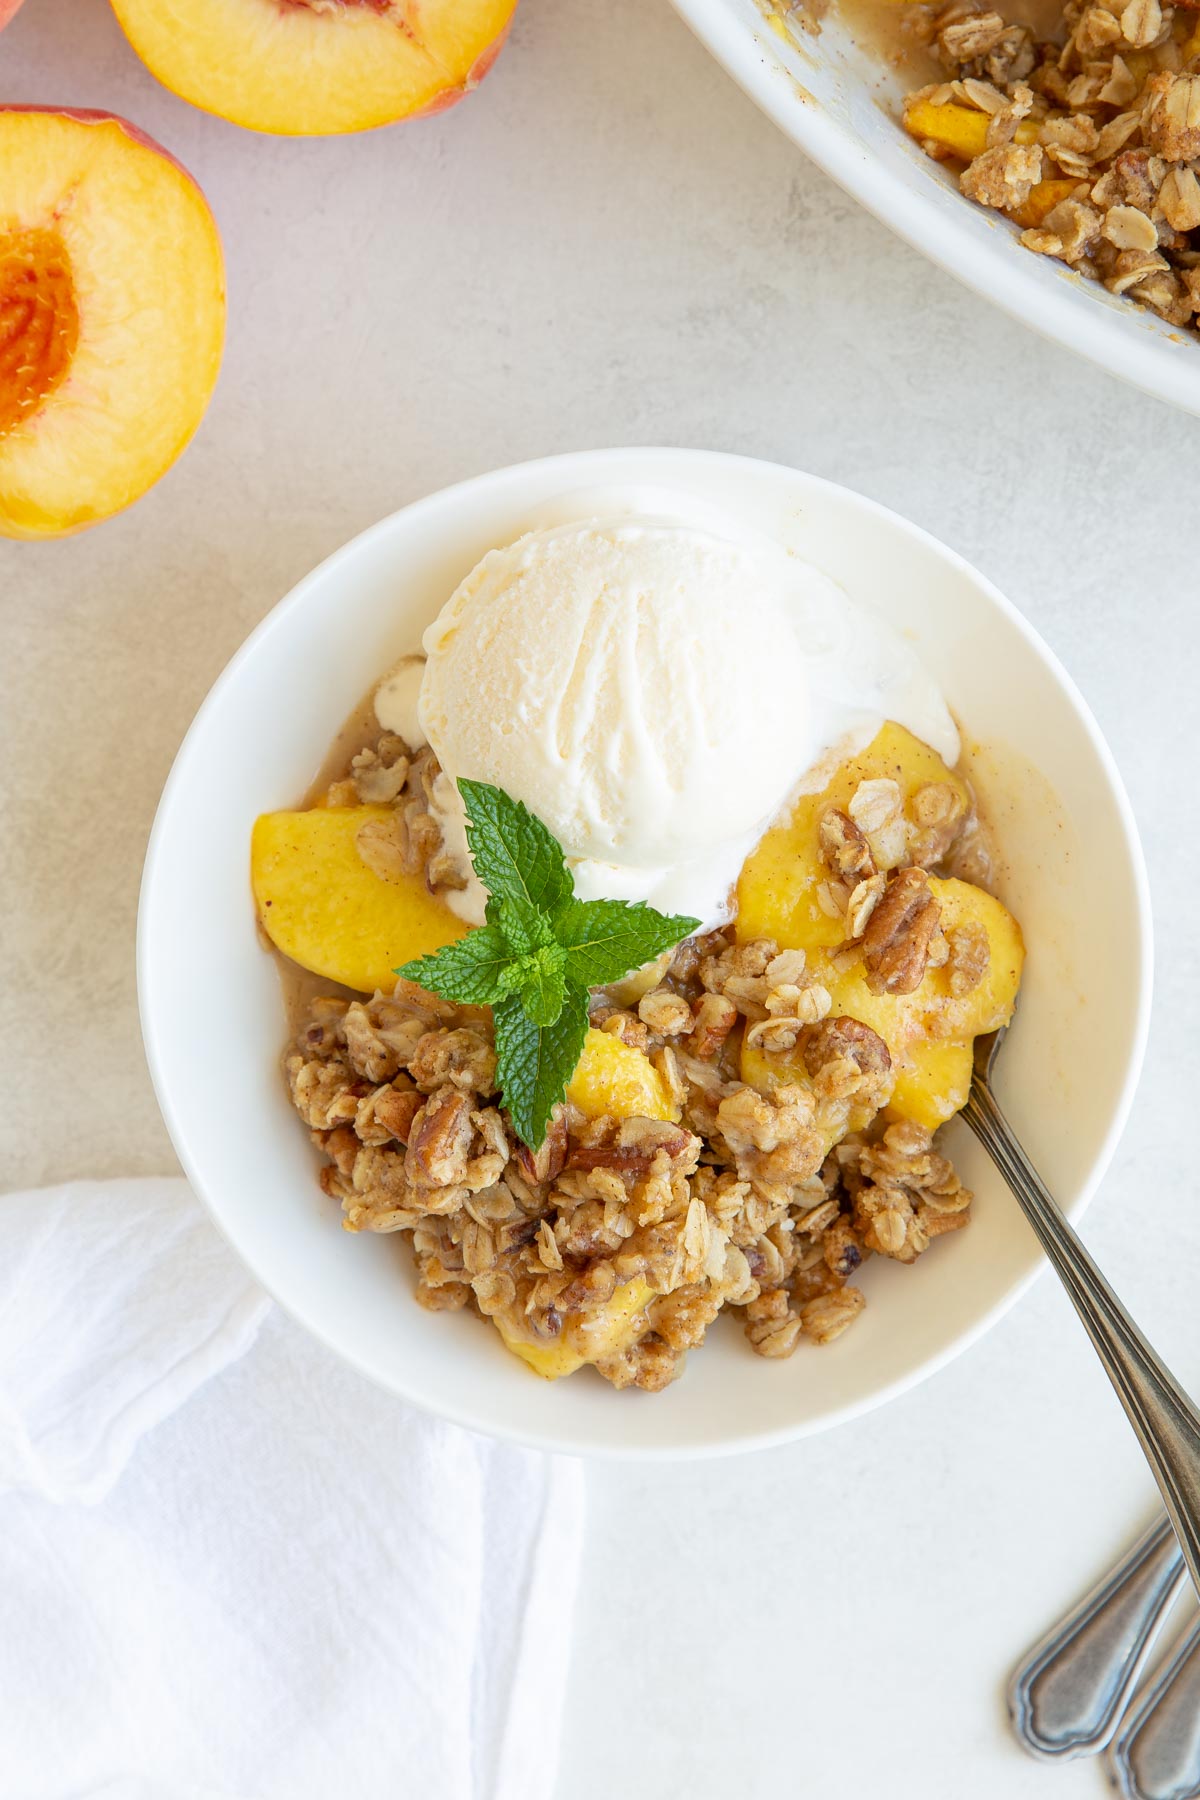 Overhead view of a bowl of peach crisp topped with a scoop of ice cream.